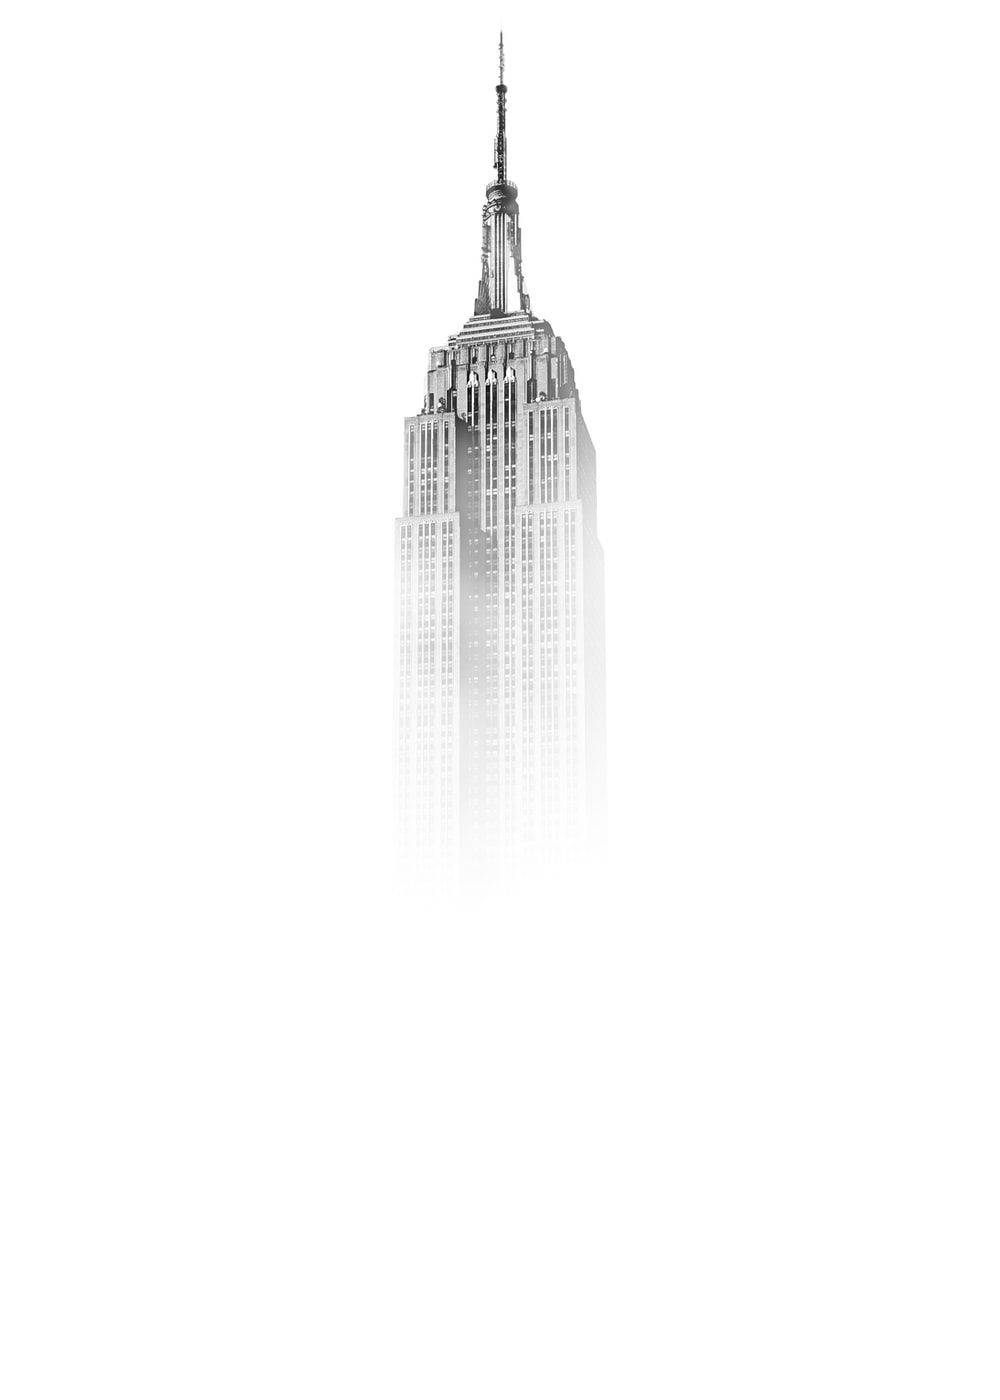 Blank White Empire State Building Faded Picture